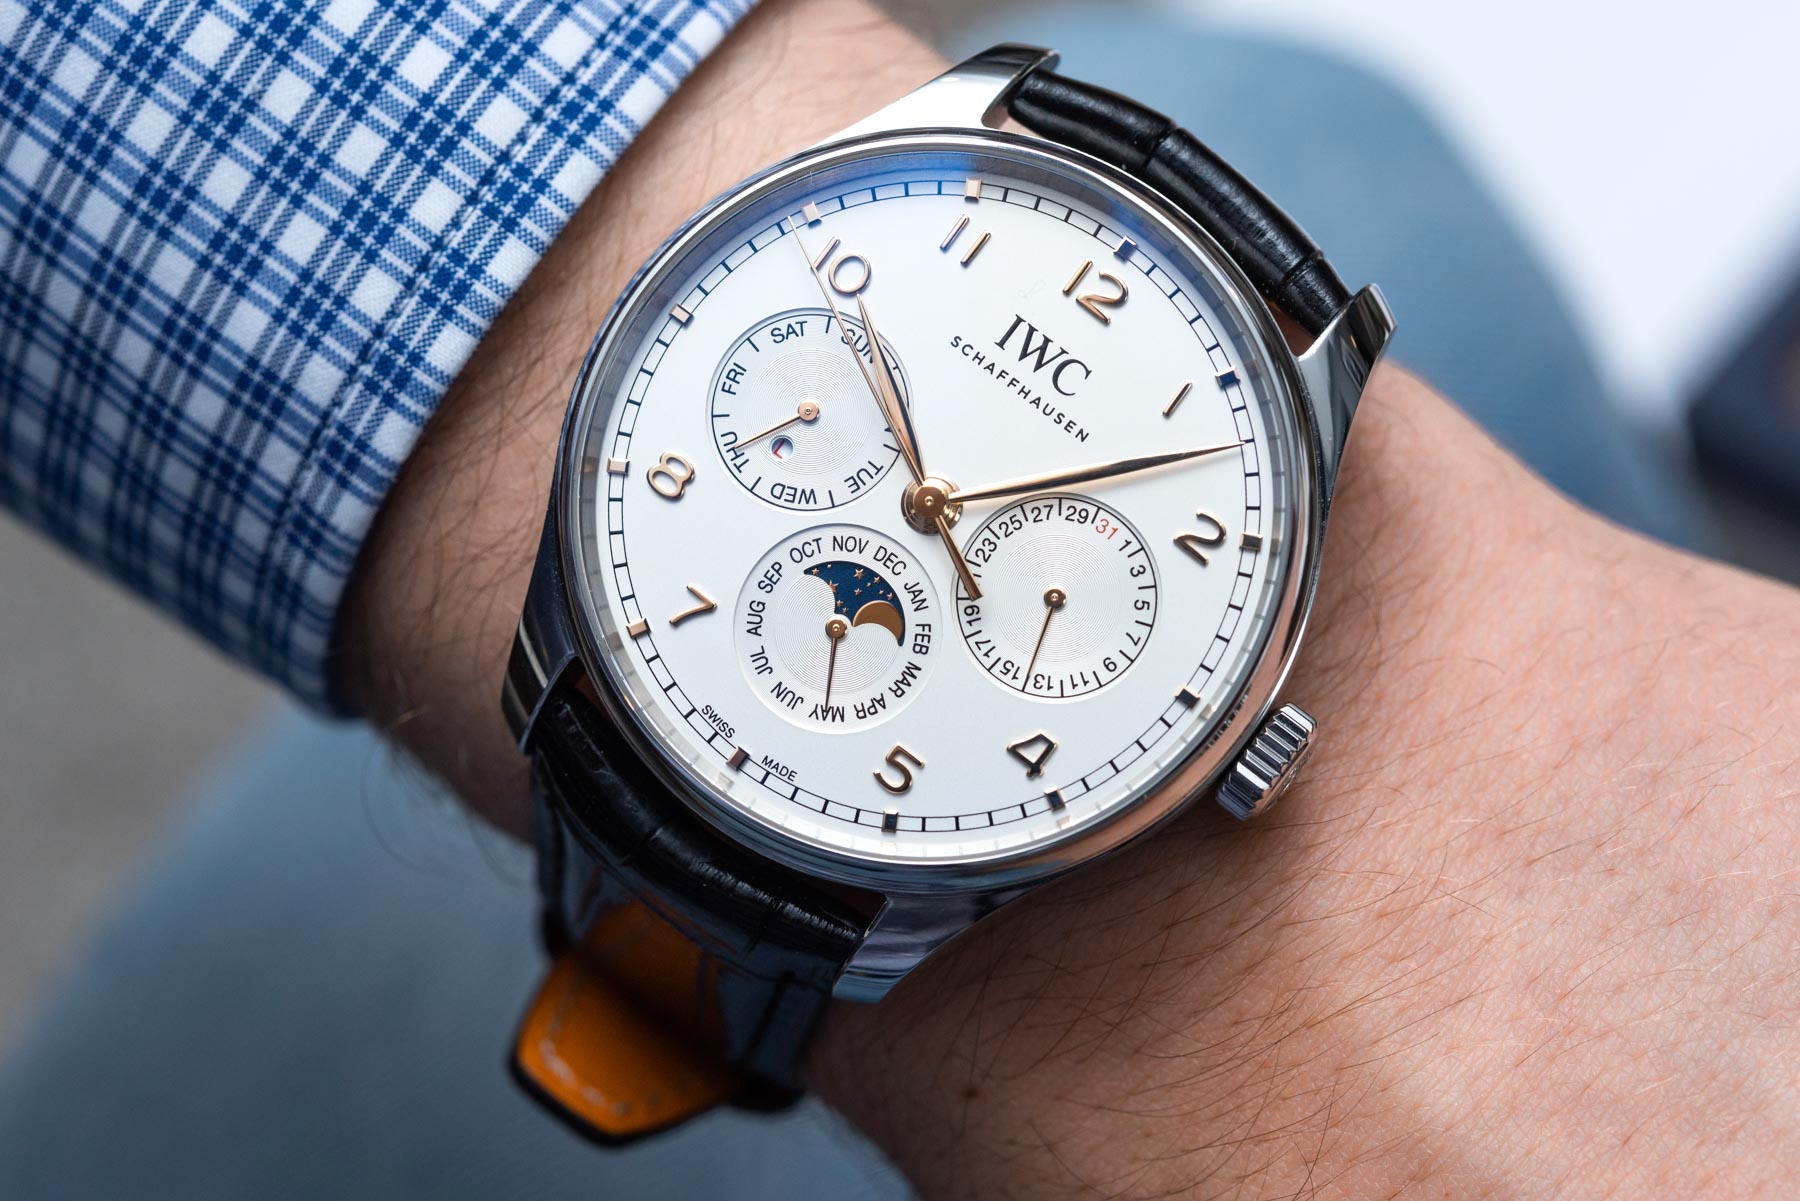 Hands-On Debut: IWC Portugieser Perpetual Calendar 42 Watch Scales Things Down For 2020